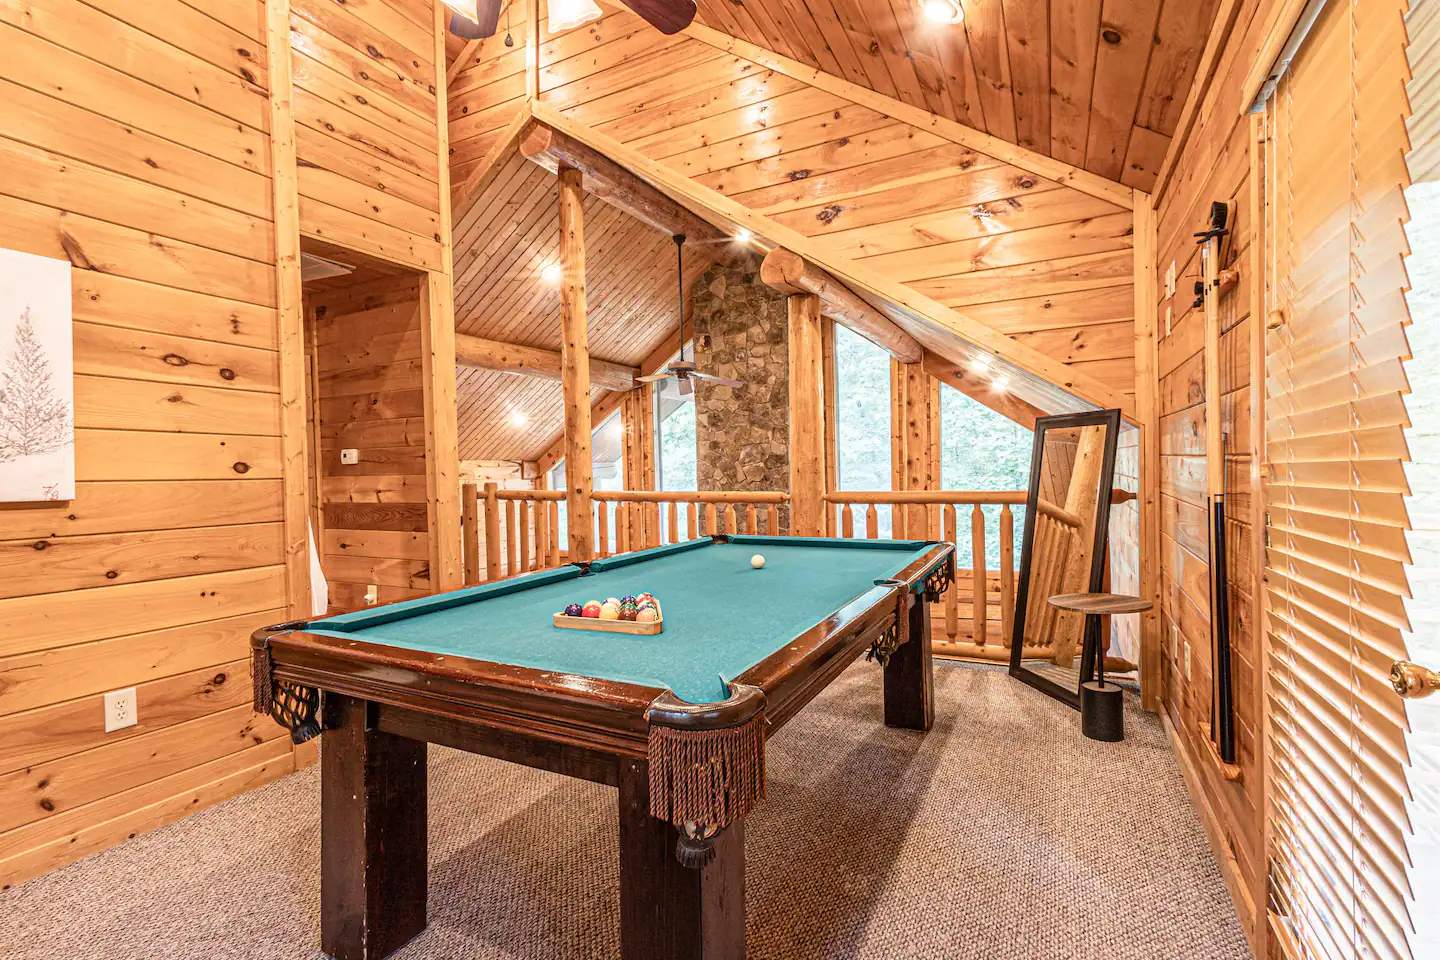 The other side of the upstairs is an open loft with a 7' slate pool table and a balcony overlooking the side deck area and thick trees.